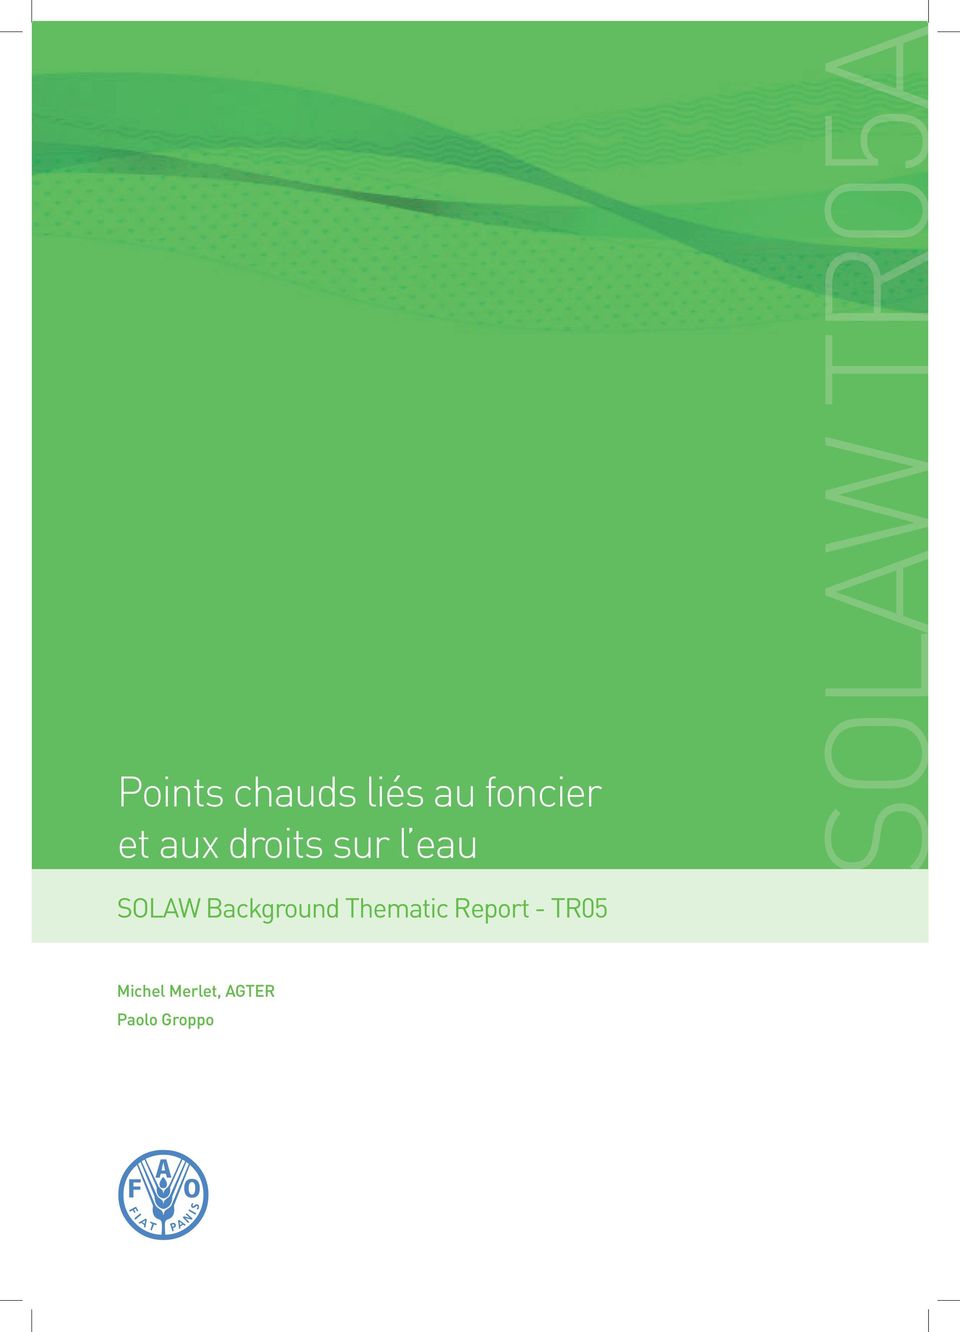 Background Thematic Report - TR05